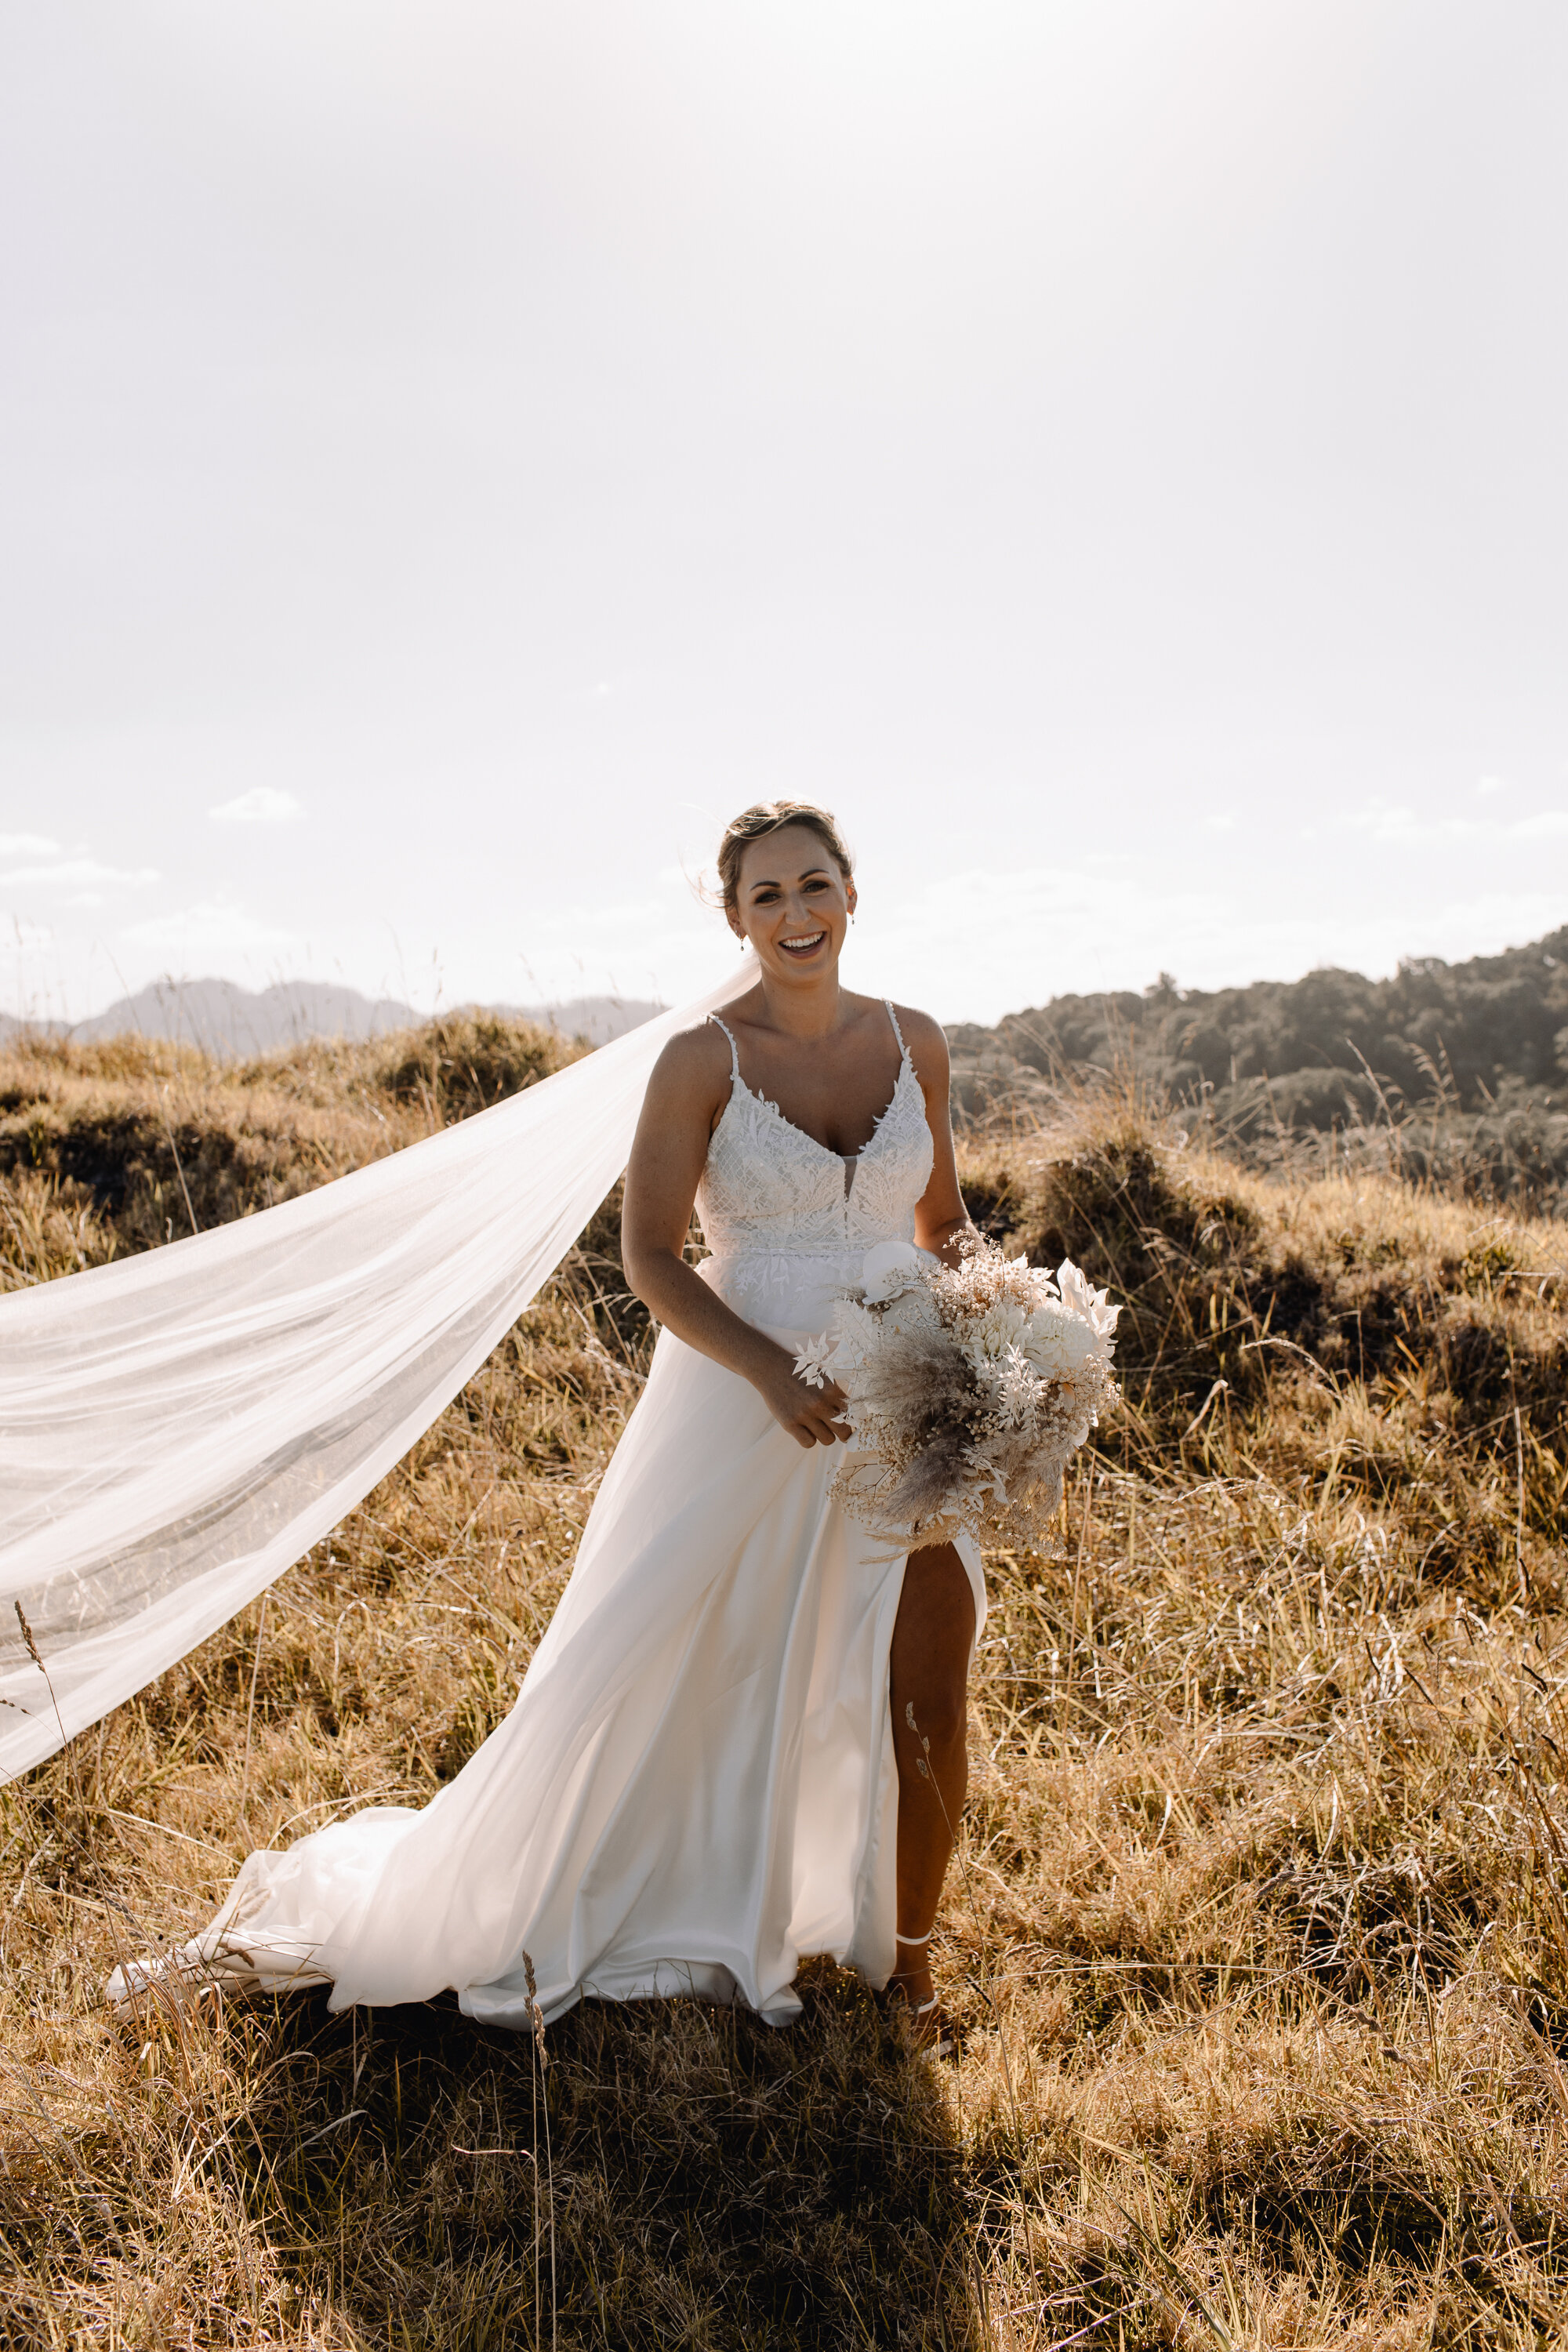 Our Brides | Tammy and Greg Wedding Journey